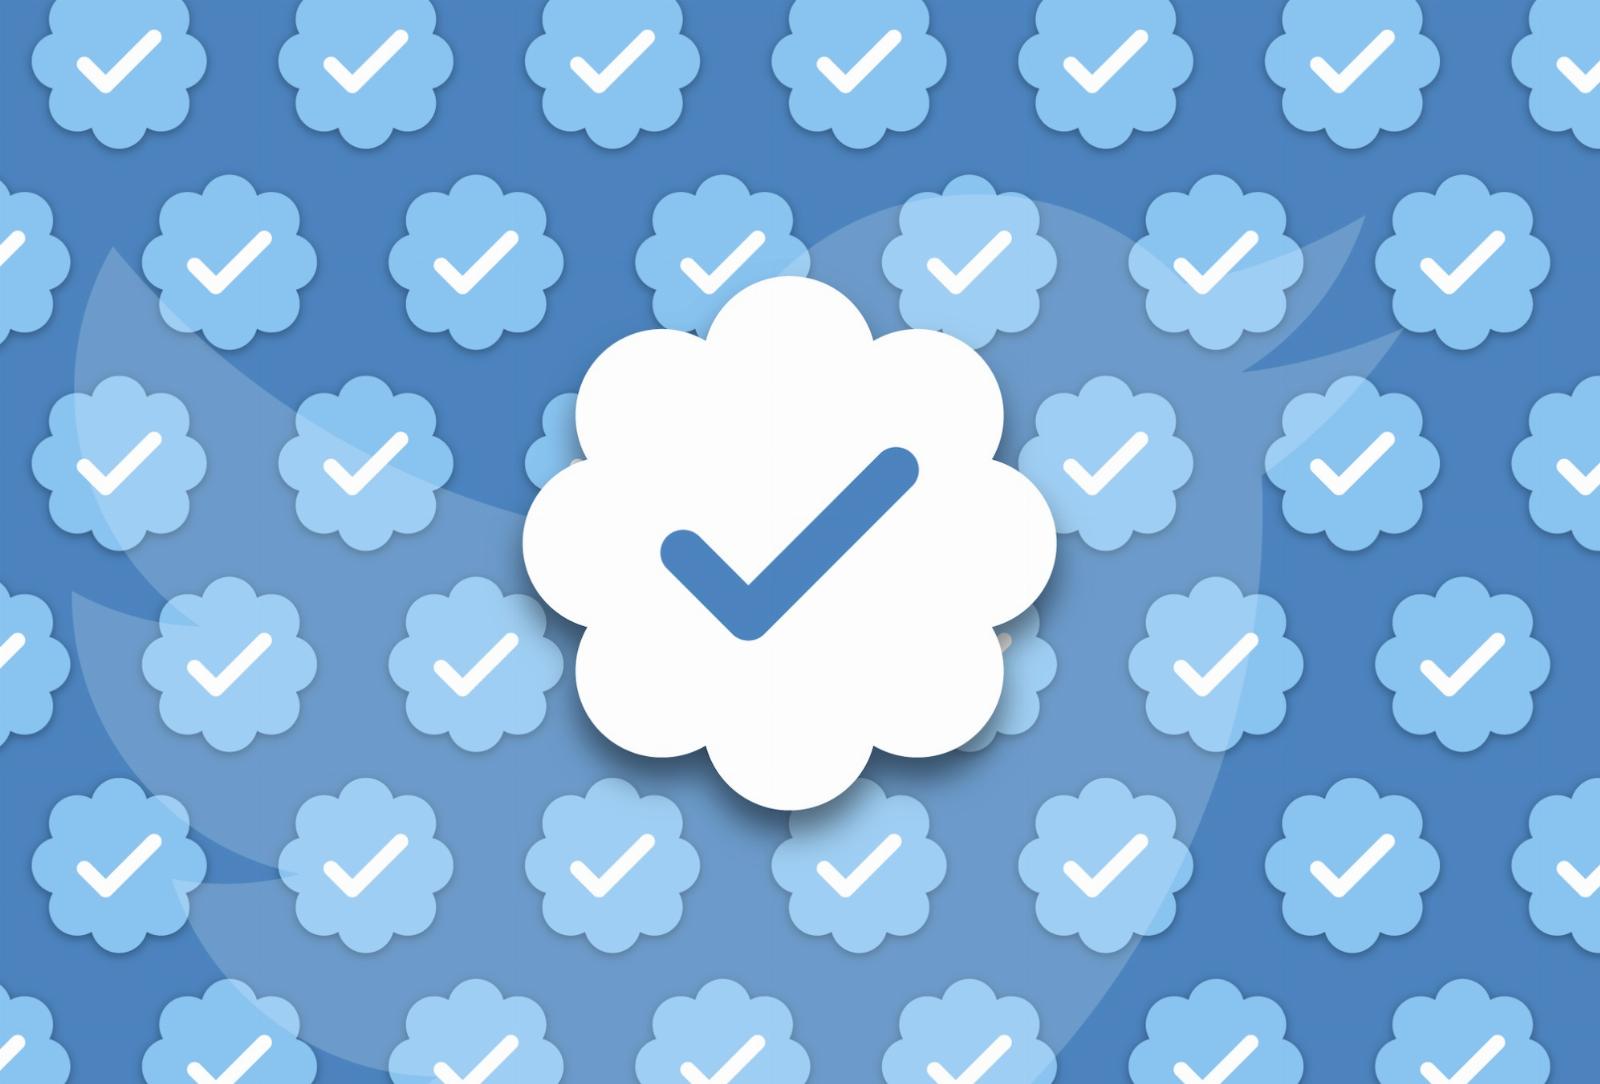 Daily Crunch: New Twitter Blue feature will reportedly squelch 50% of ads for paid members